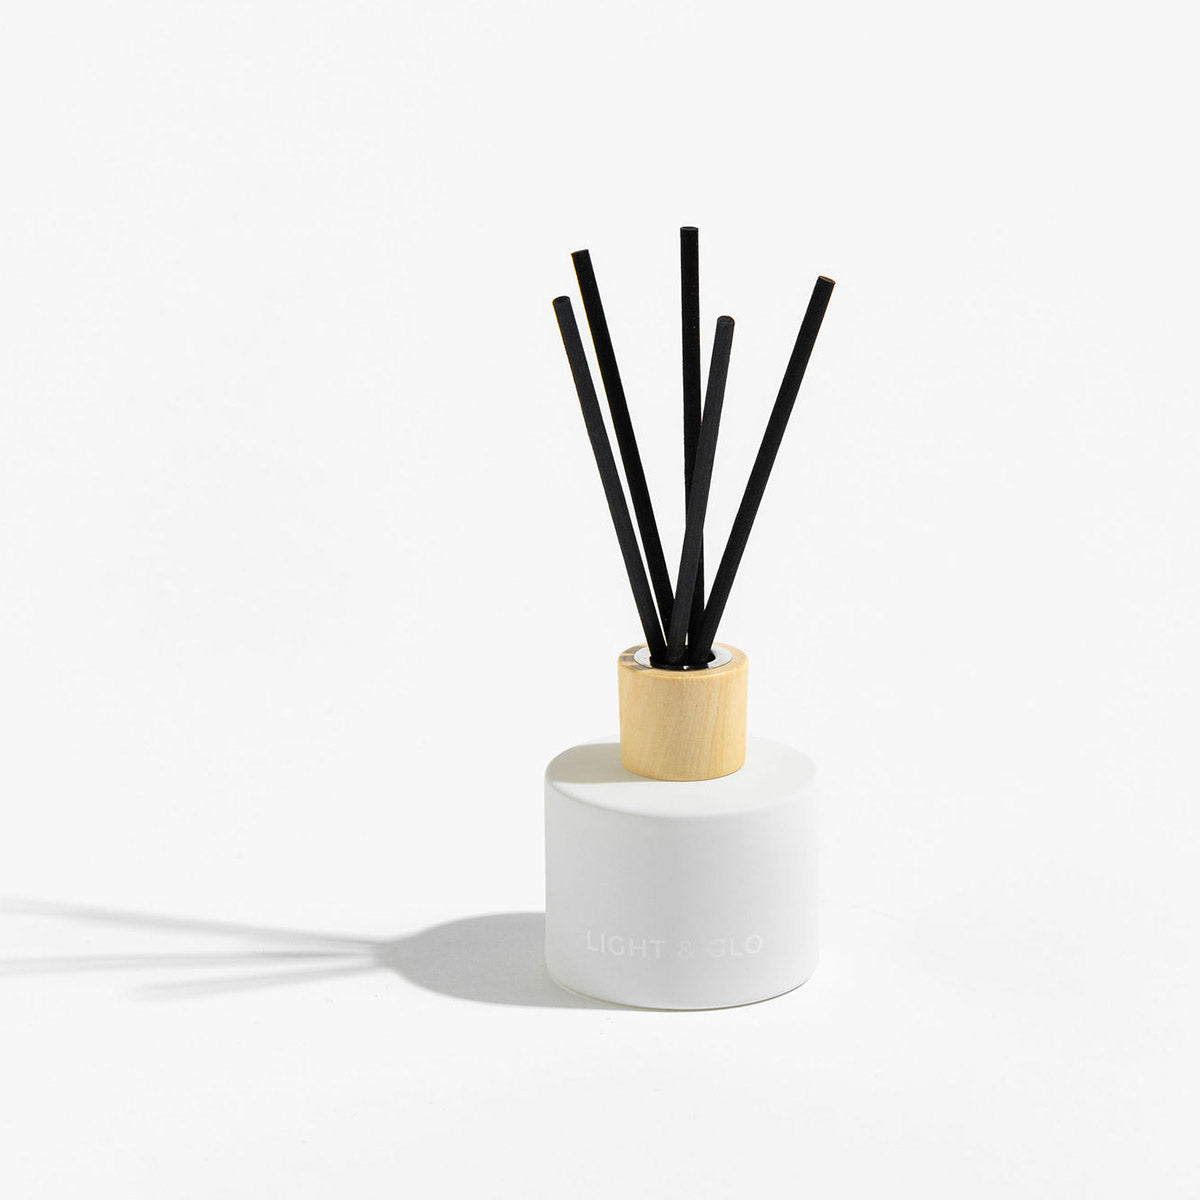 Relaxation - Asana Scent Diffuser | Luxury Candles & Home Fragrances by Light + Glo